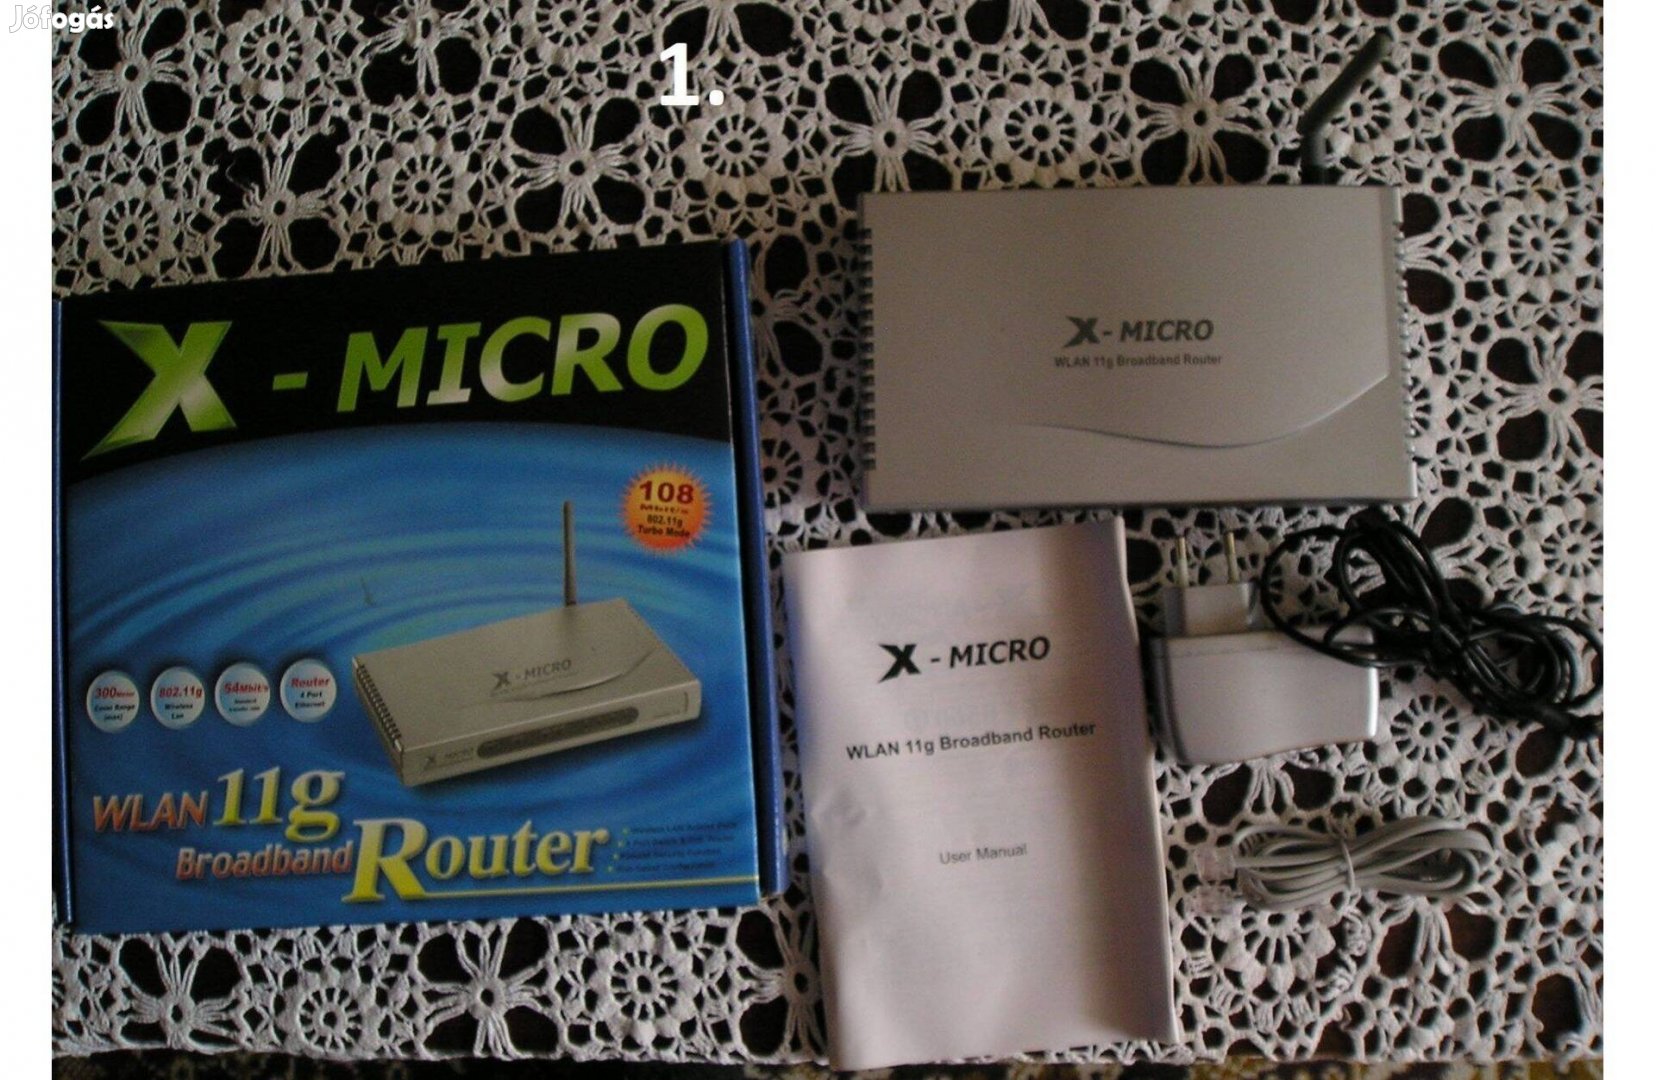 Router - X-Micro